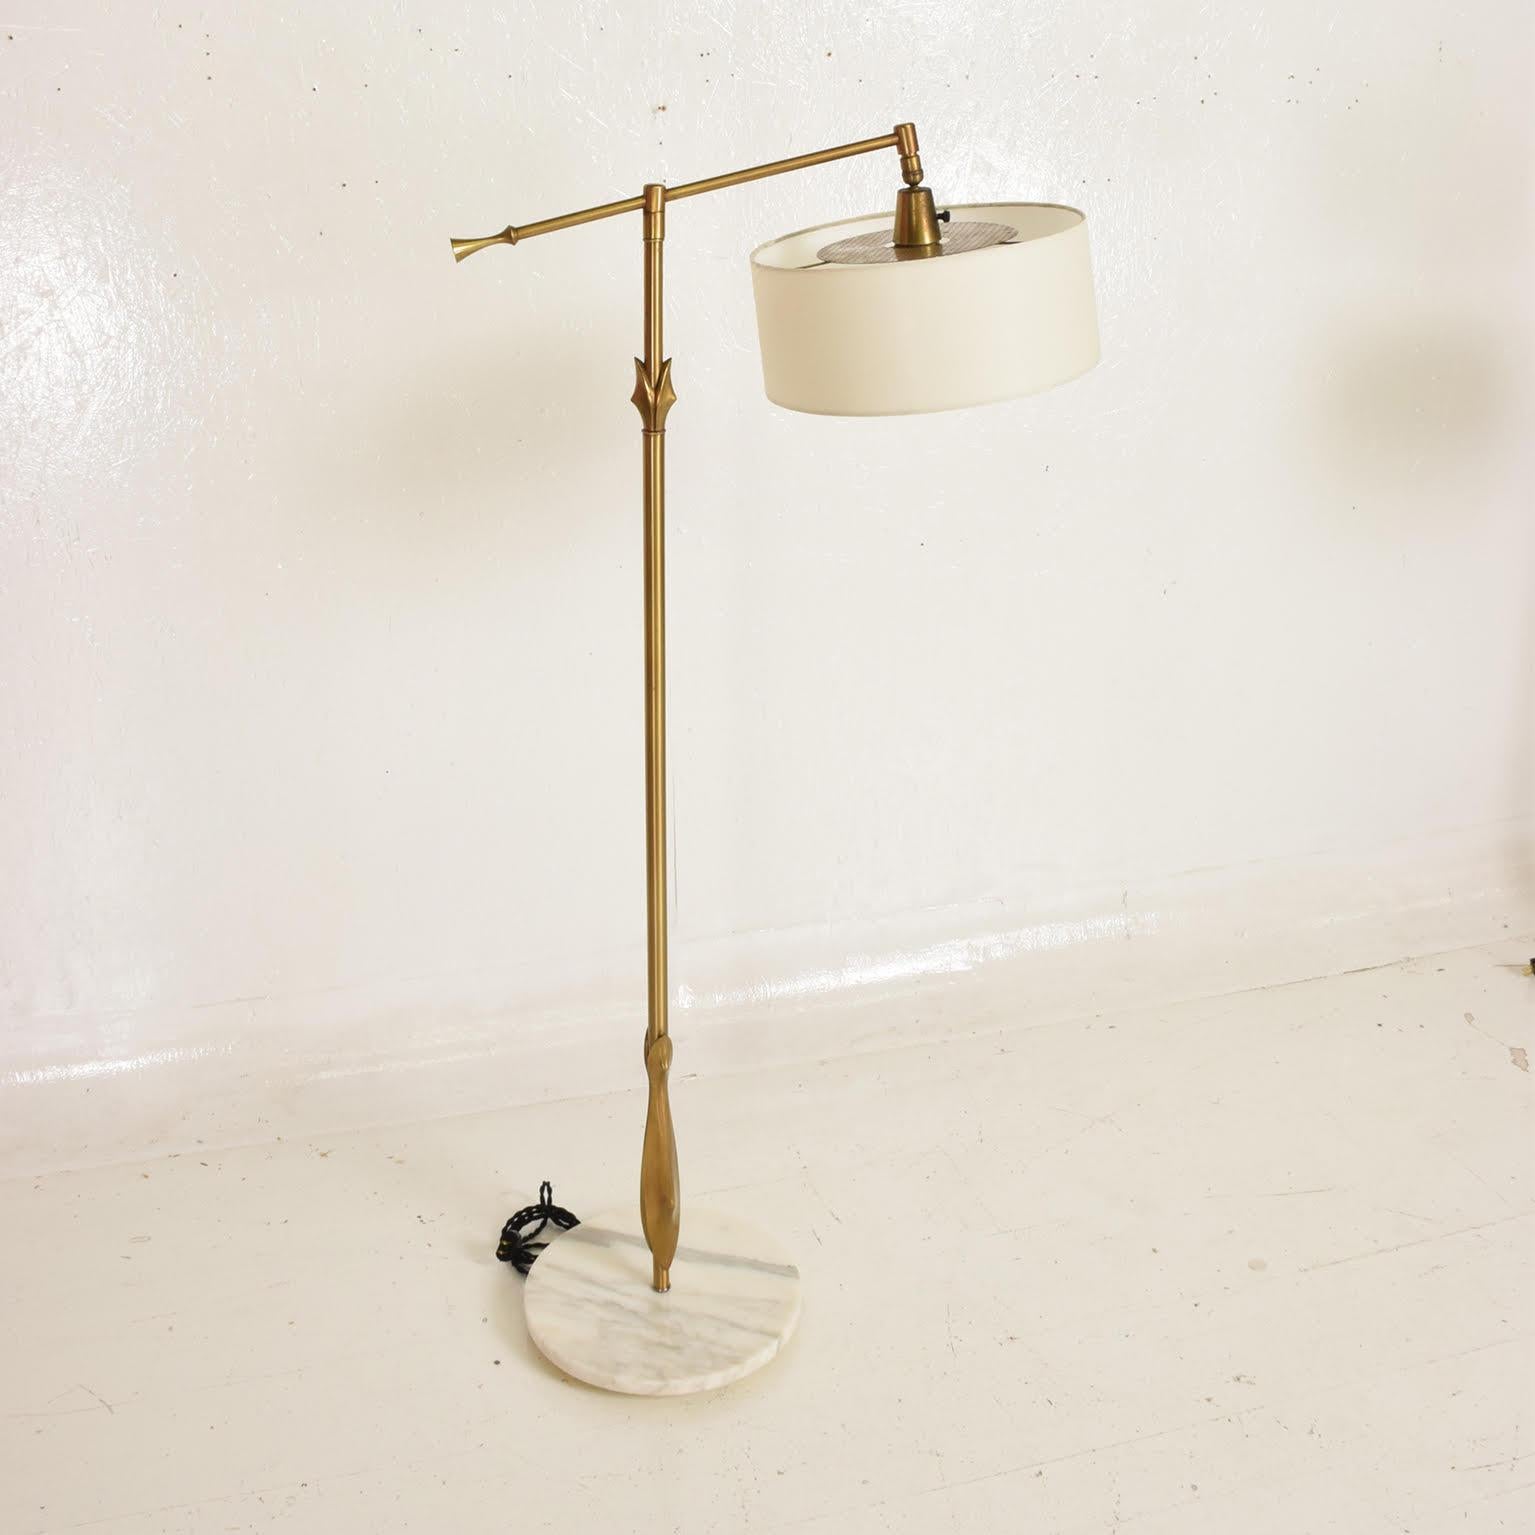 Mid-20th Century Rare Pair of Floor Lamps by Gerald Thurston with Original Shade and Marble Base